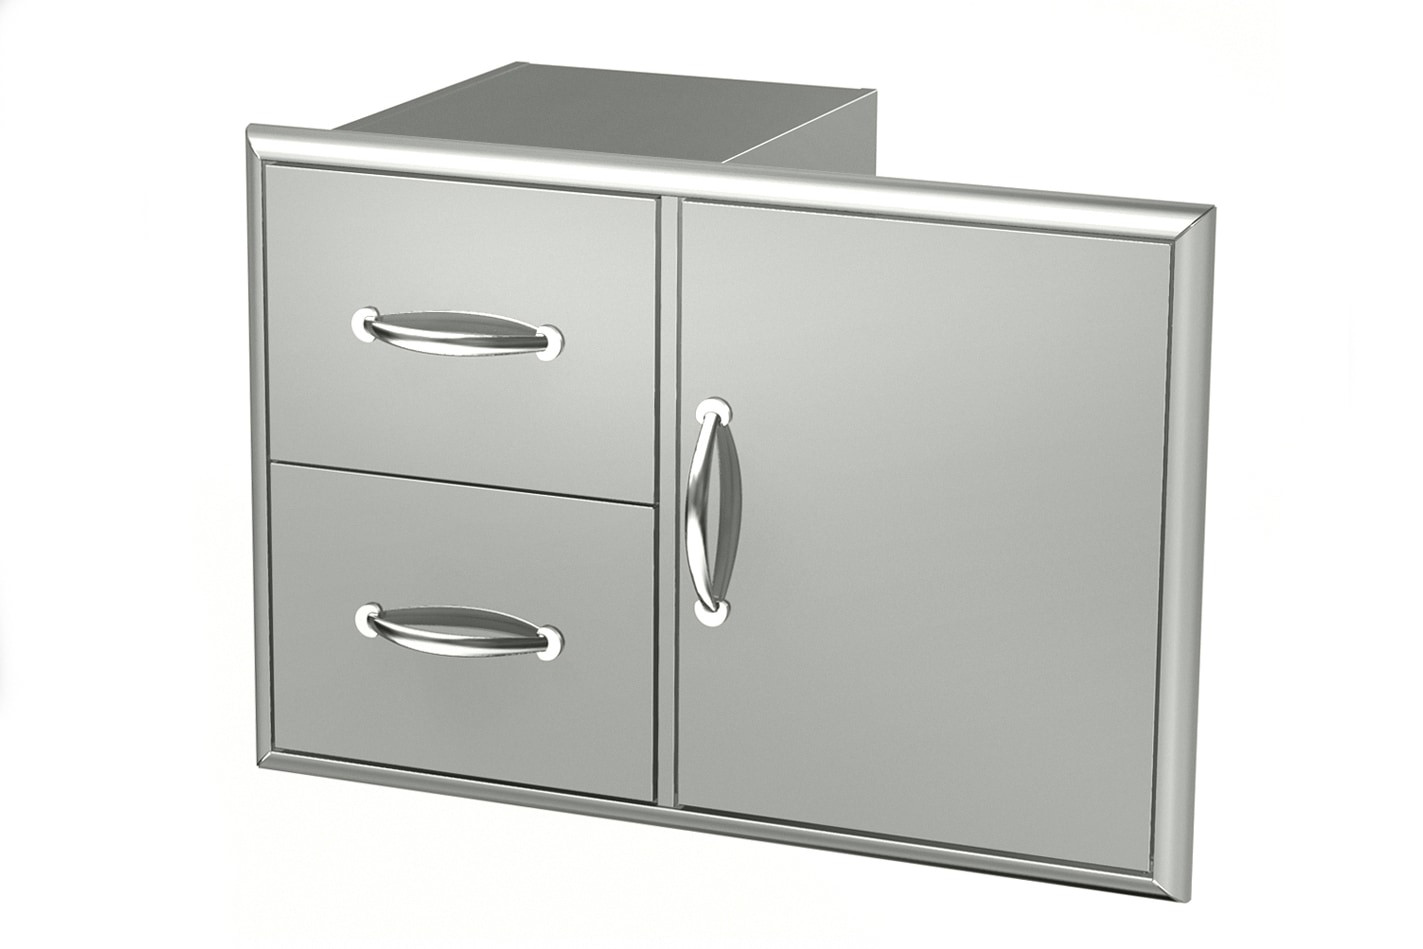 Outdoor Kitchen Doors And Drawers
 BroilChef Stainless Steel Drawers Stainless Steel Double